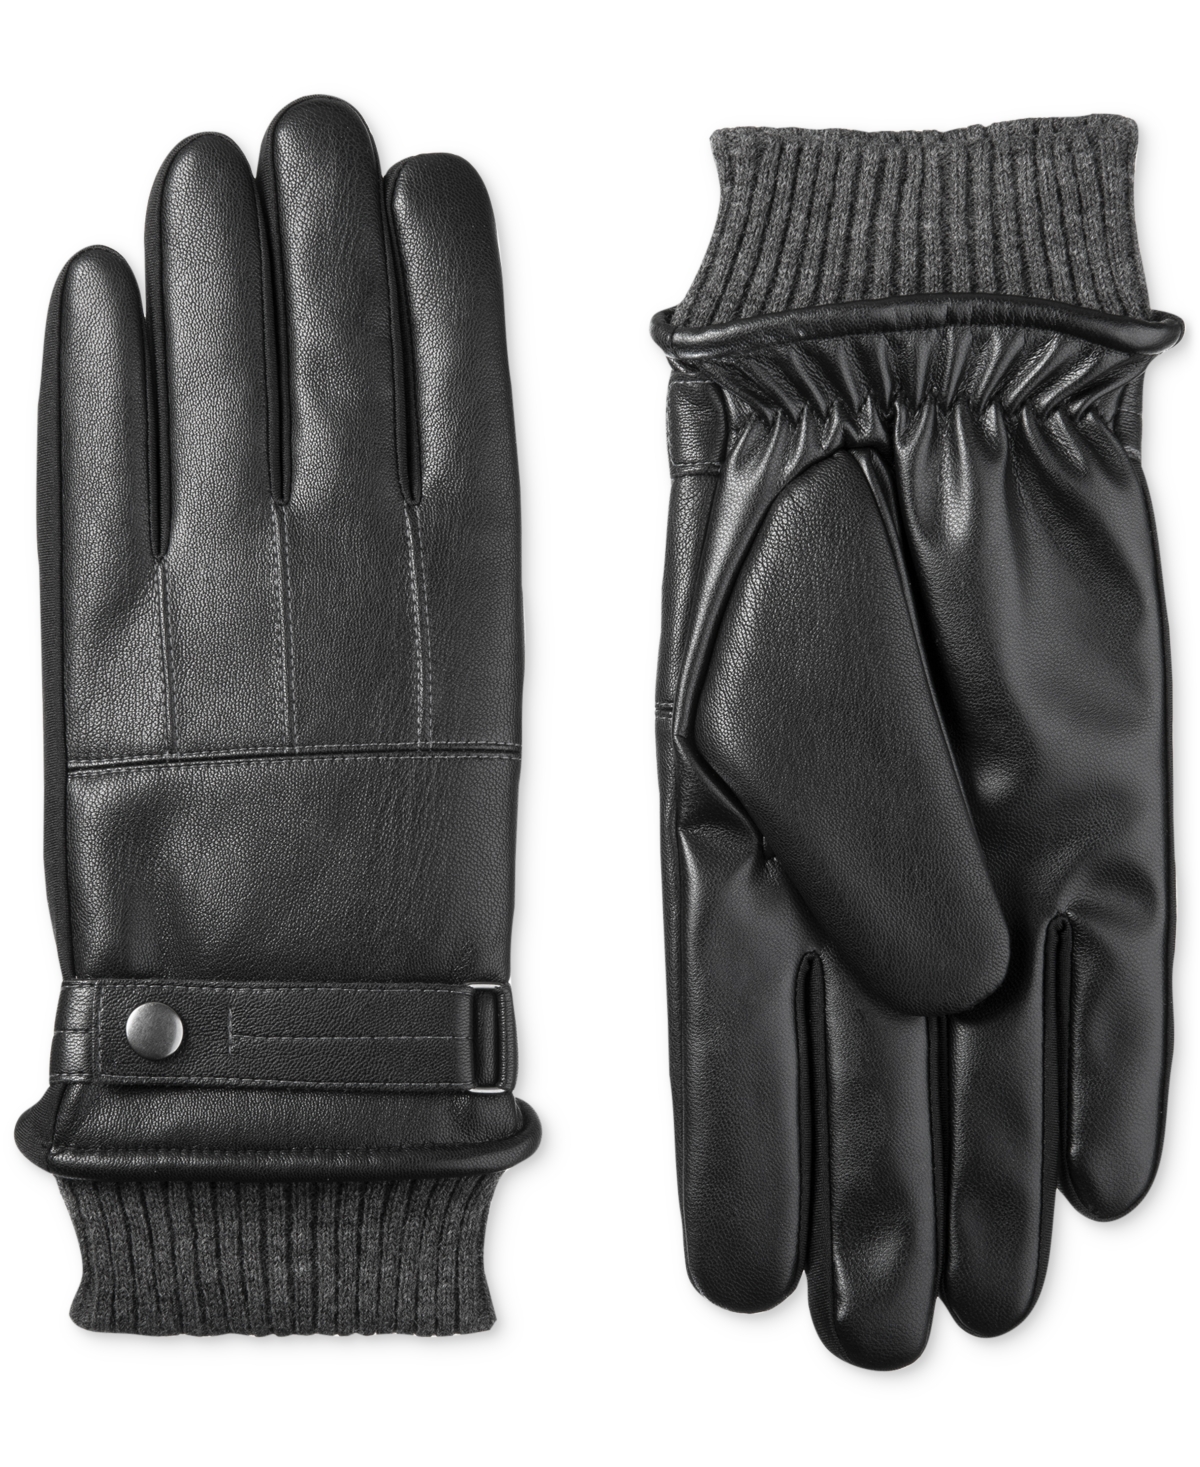 Men's Insulated Faux-Leather Touchscreen Gloves - Black